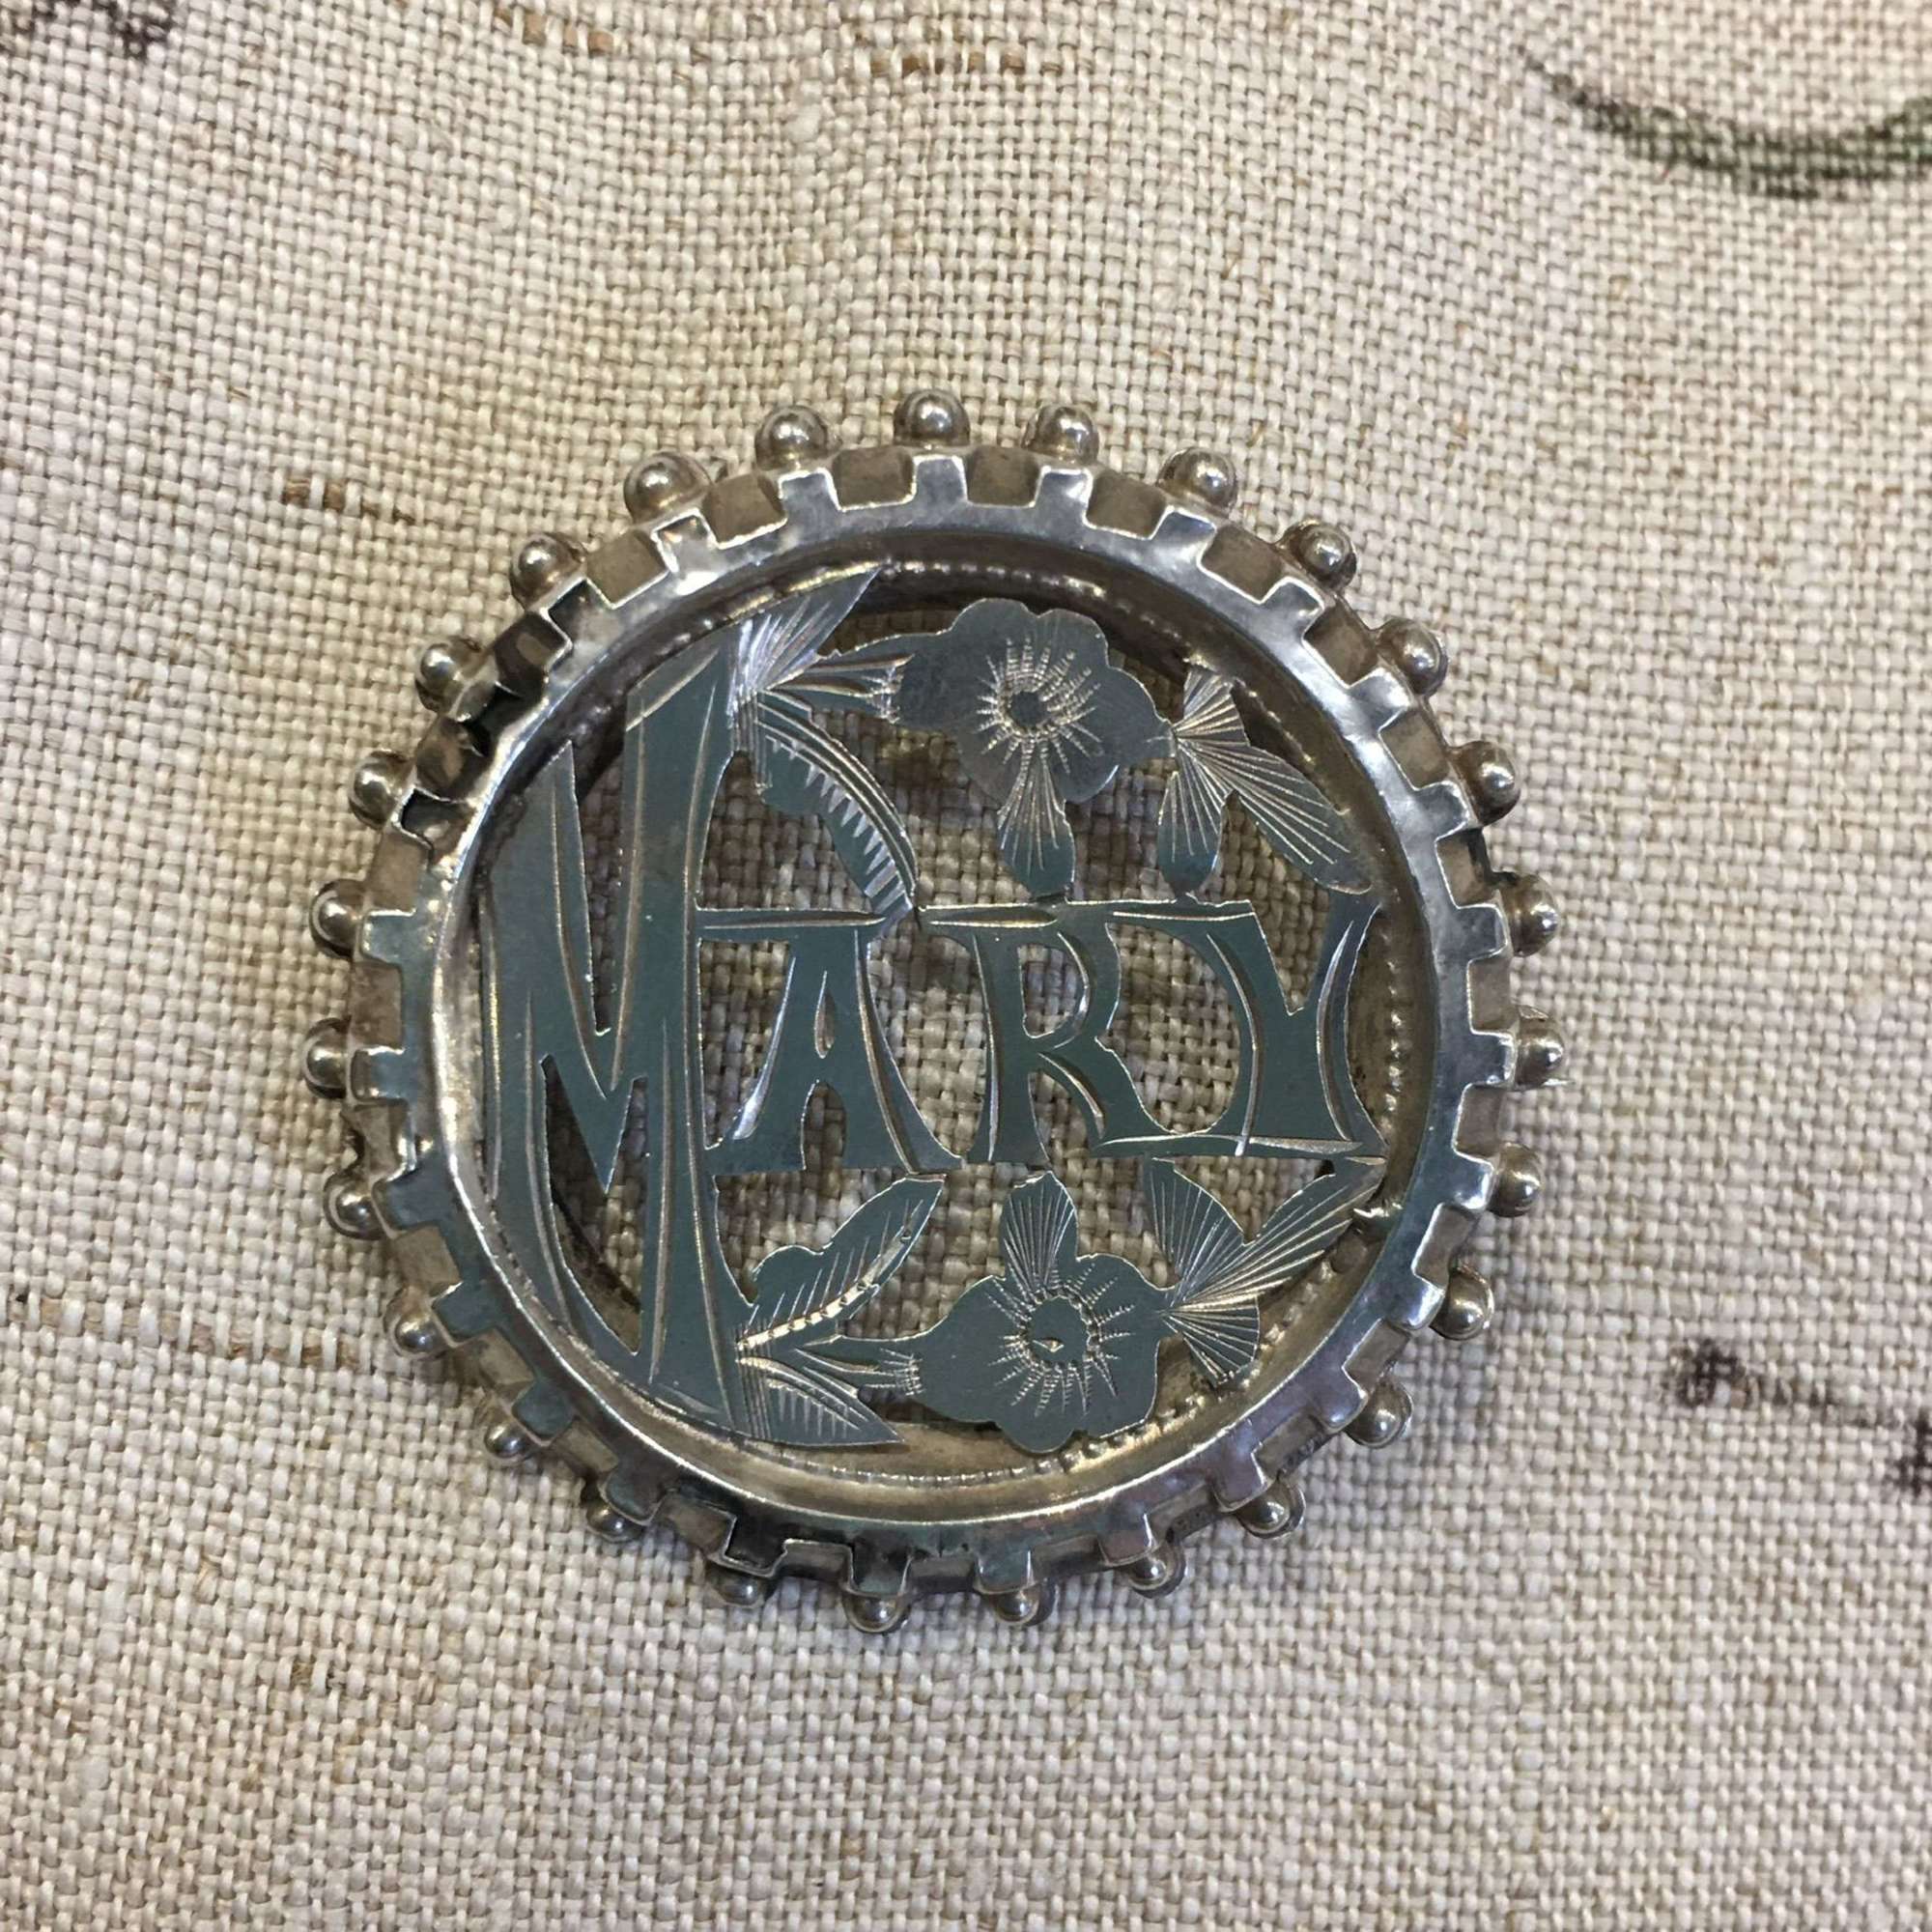 Large round Georgian antique silver name brooch “Mary” h/m 1833